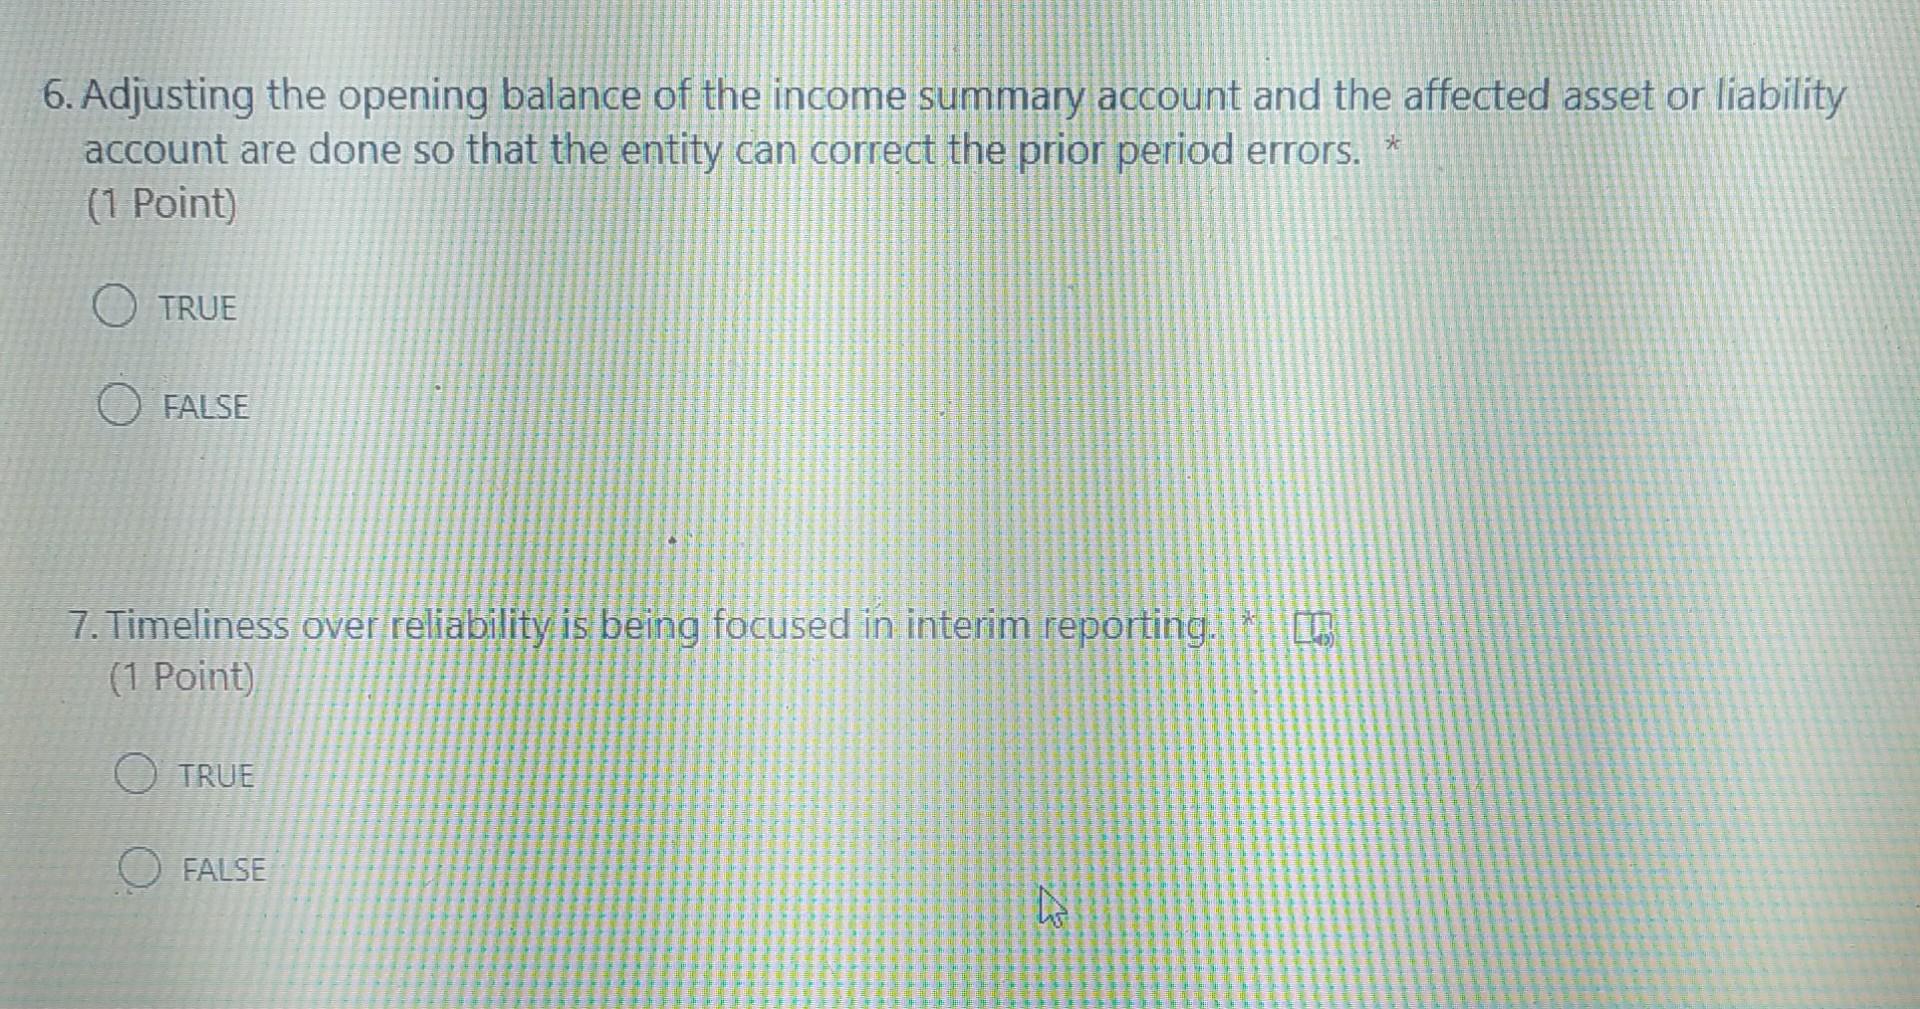 *6. Adjusting the opening balance of the income summary account and the affected asset or liabilityaccount are done so that